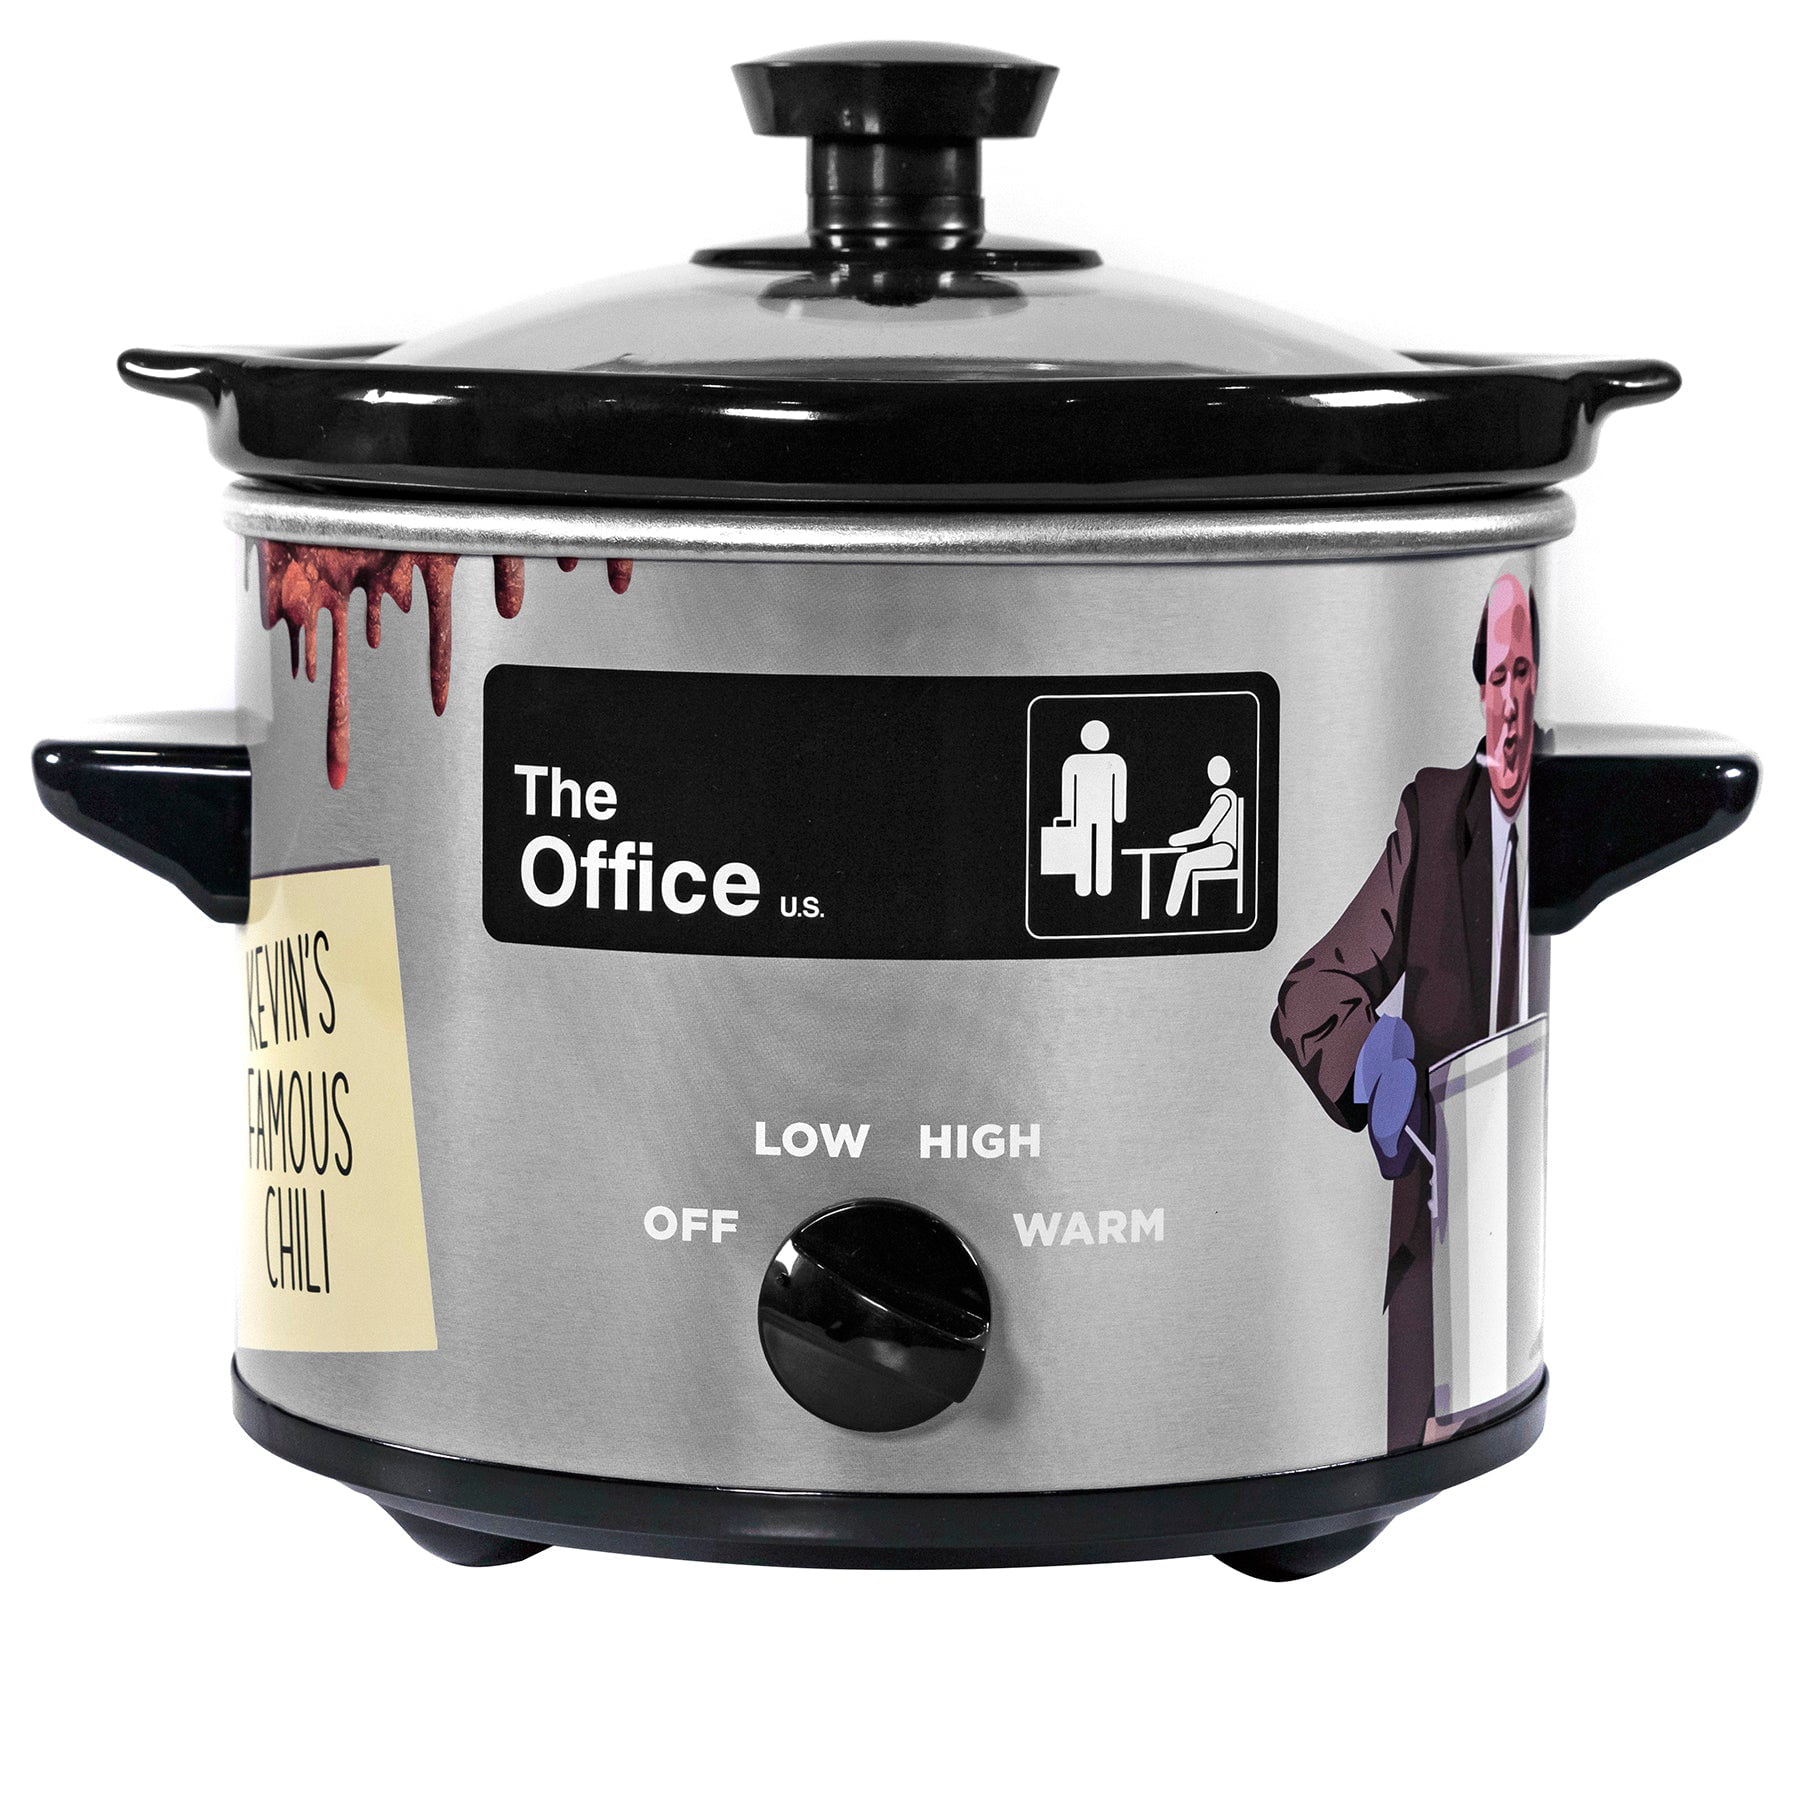 One of our favorite slow cookers is a great low price right now